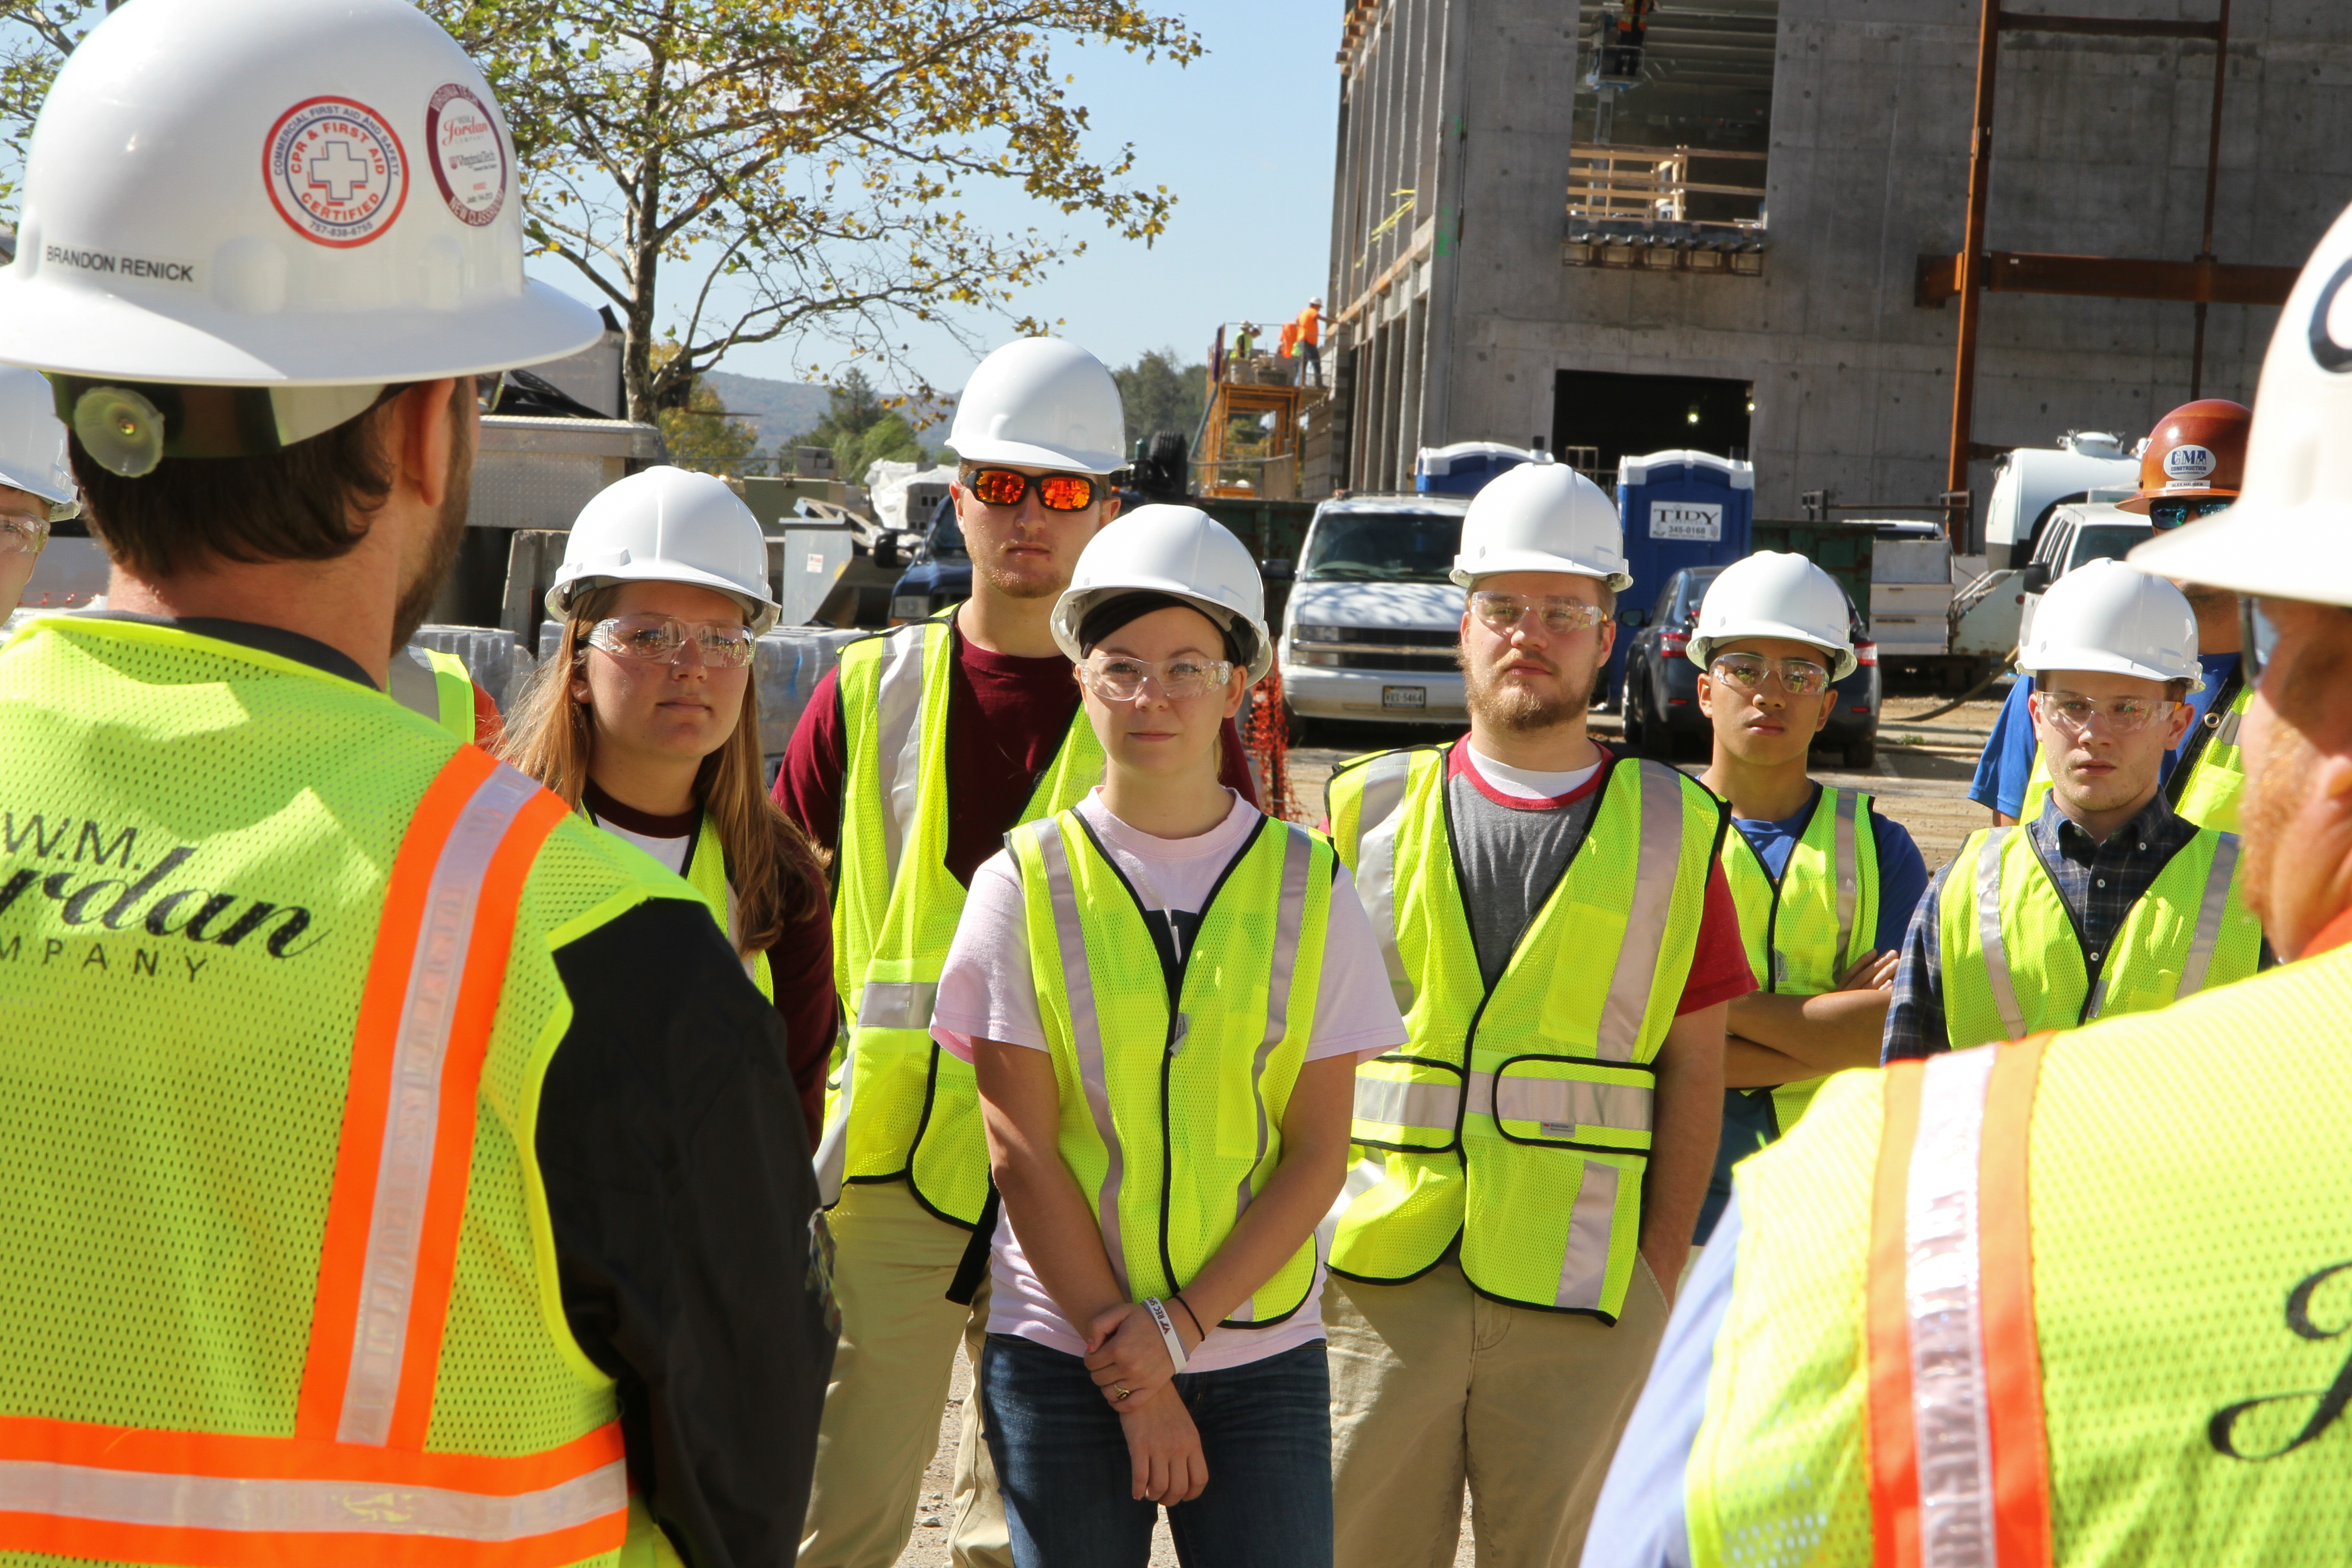 Brendon Renick Assistant Project Manager with W.M. Jordan, leads students on a tour of a  construction site.